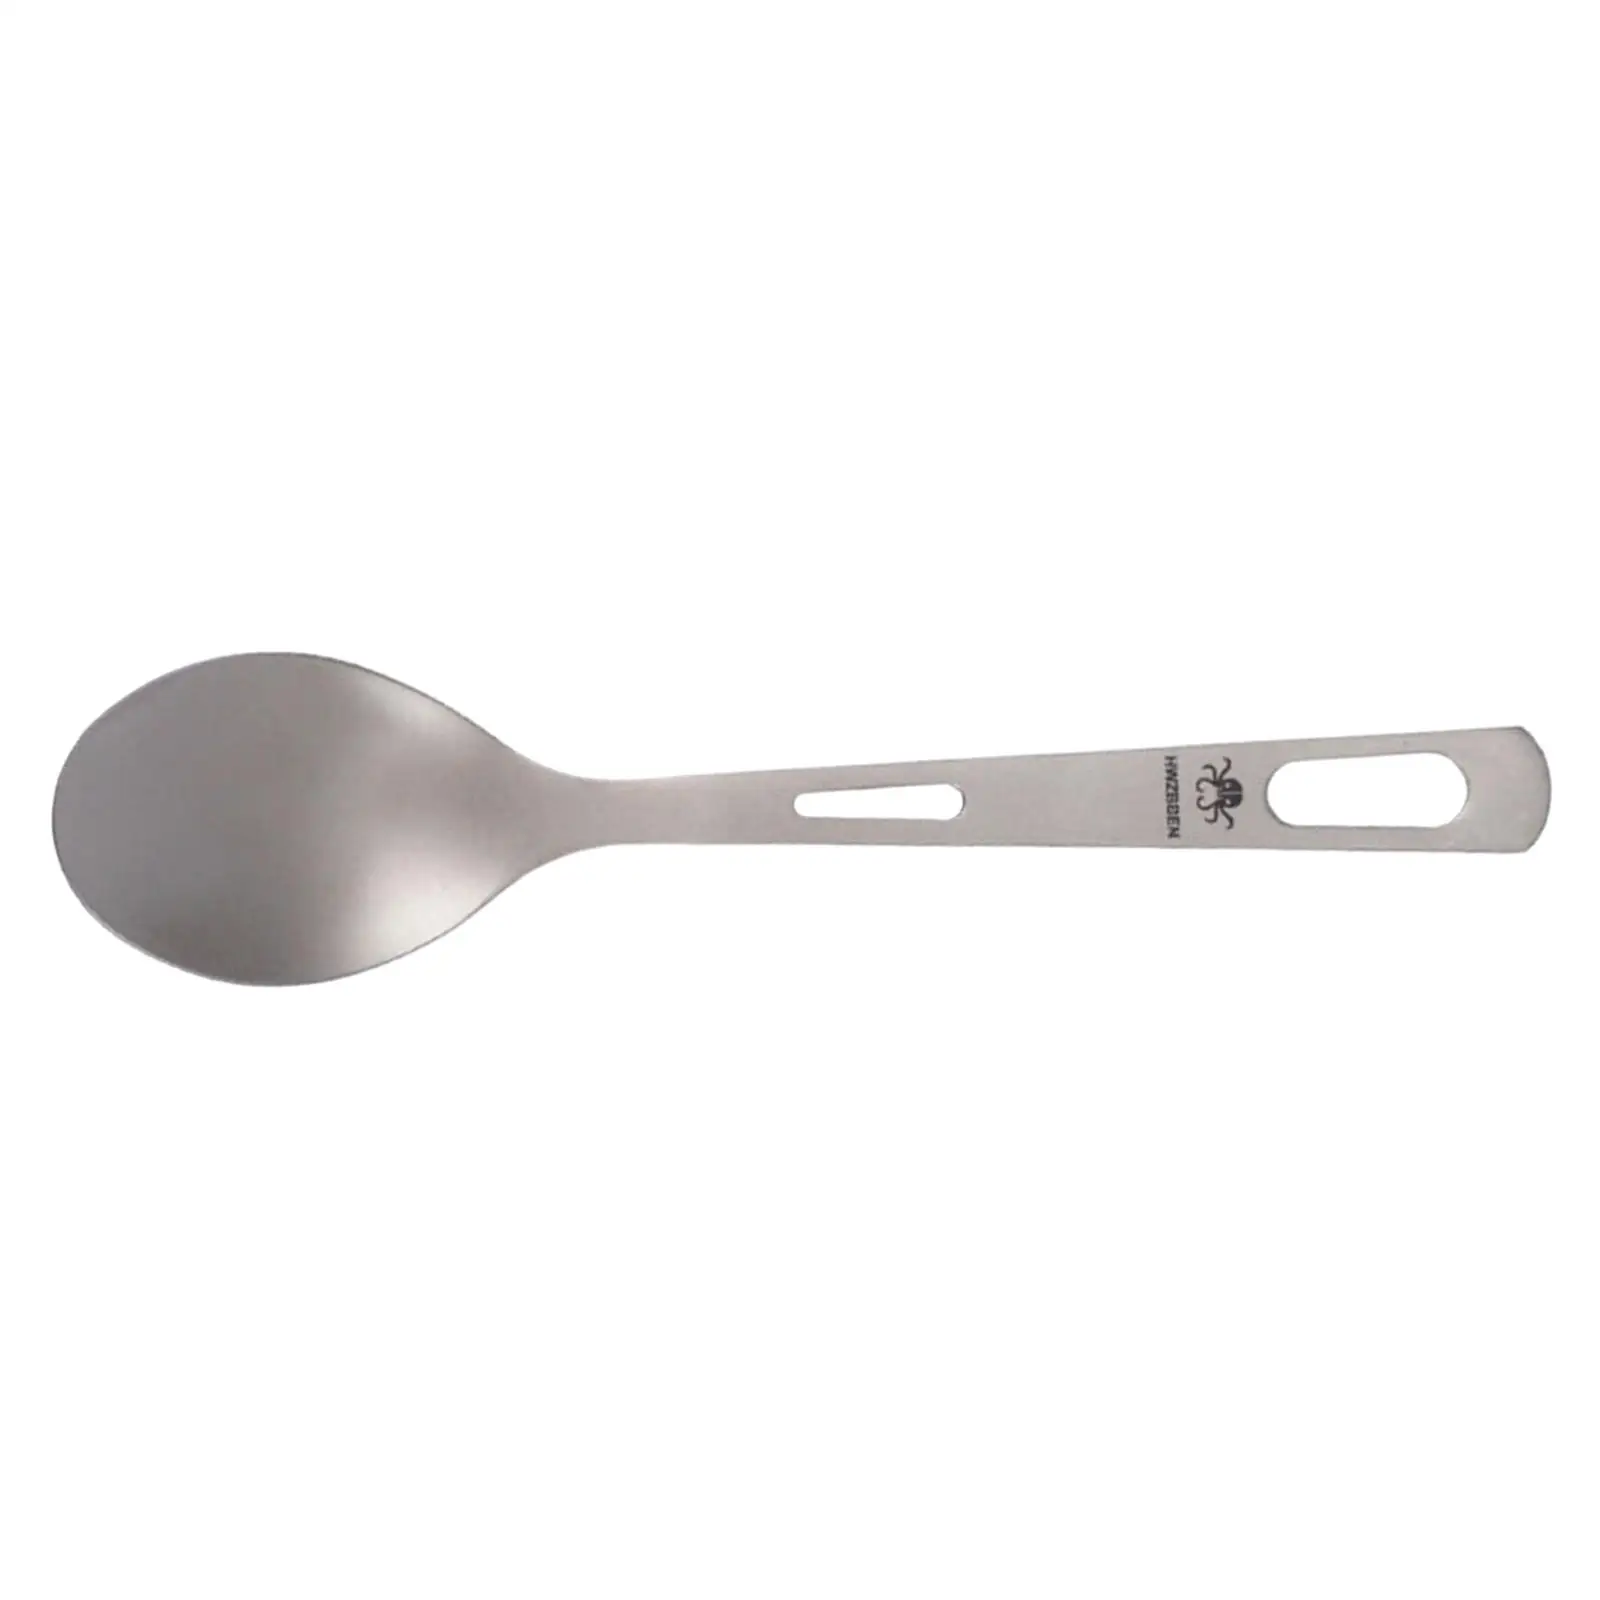 Portable Titanium Spoon Camping Flatware Tableware for Outdoor Home Use